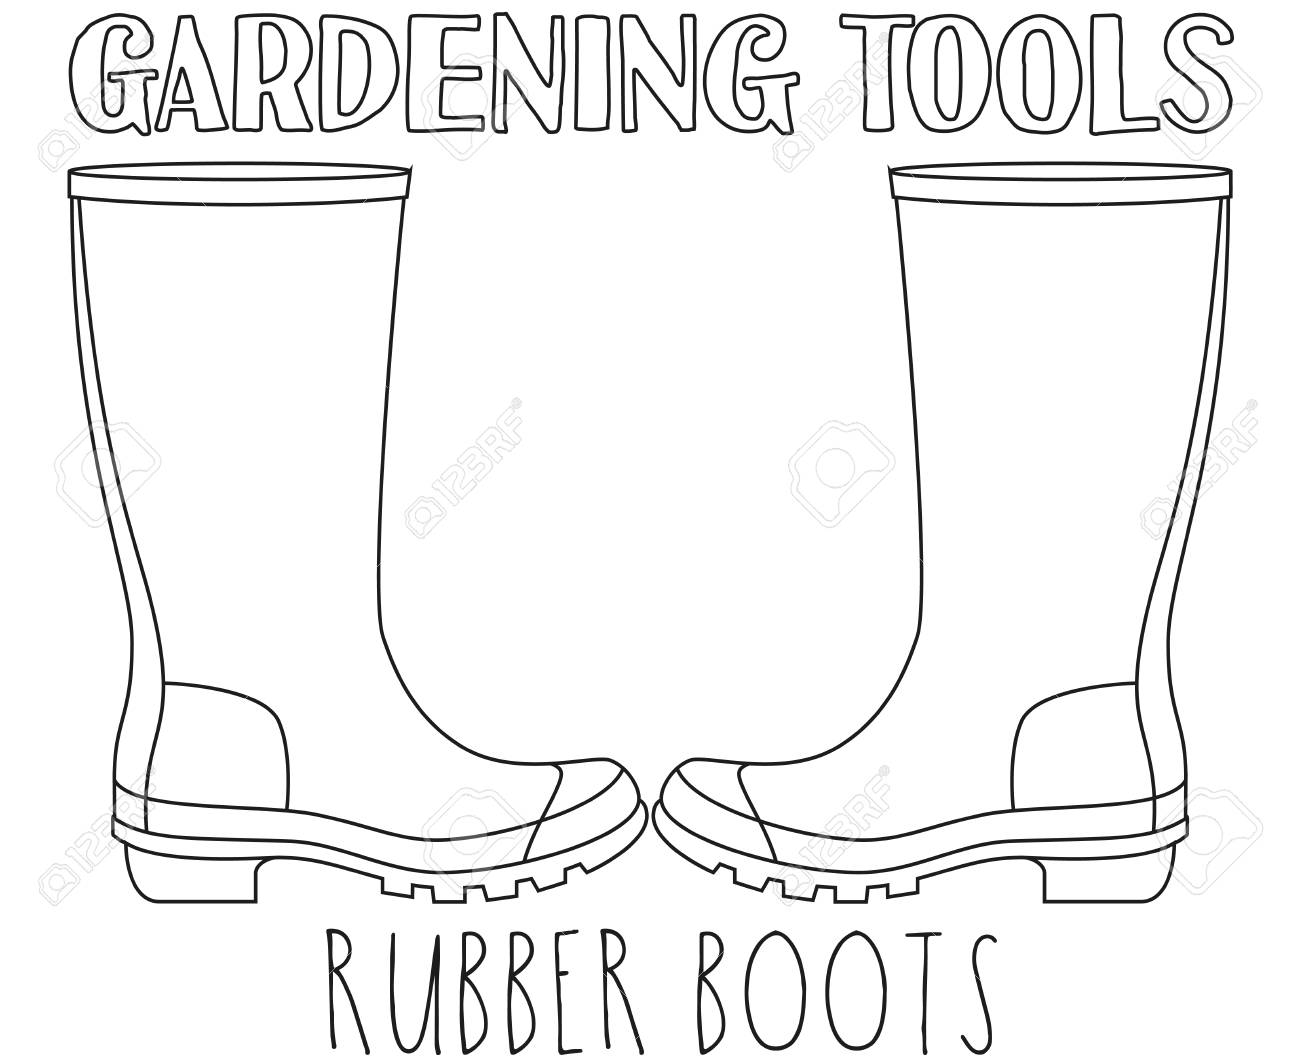 Line art black and white rubber boots coloring book page for adults and kids garden tool vector illustration for gift card certificate sticker badge sign stamp logo label icon poster banner royalty